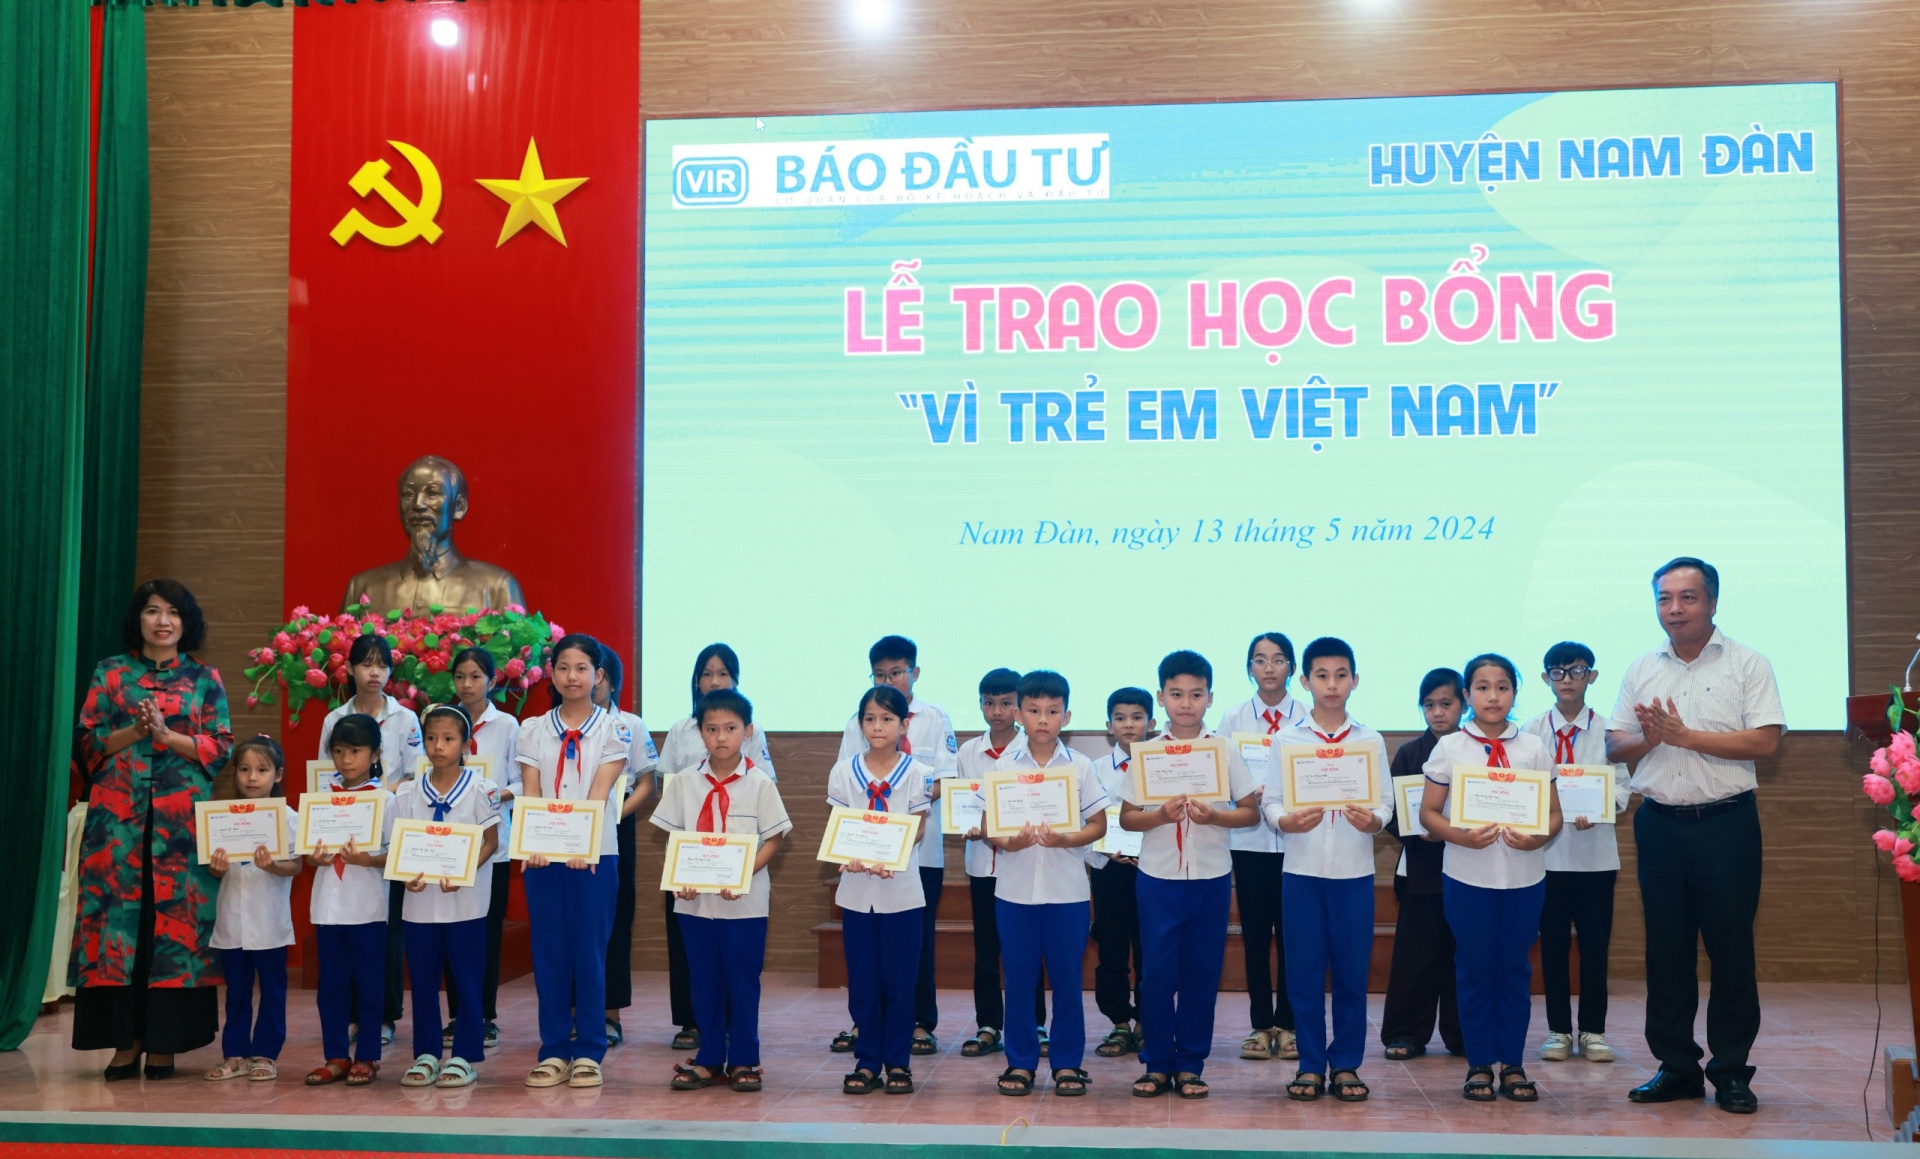 Scholarships awarded to students in Nghe An province